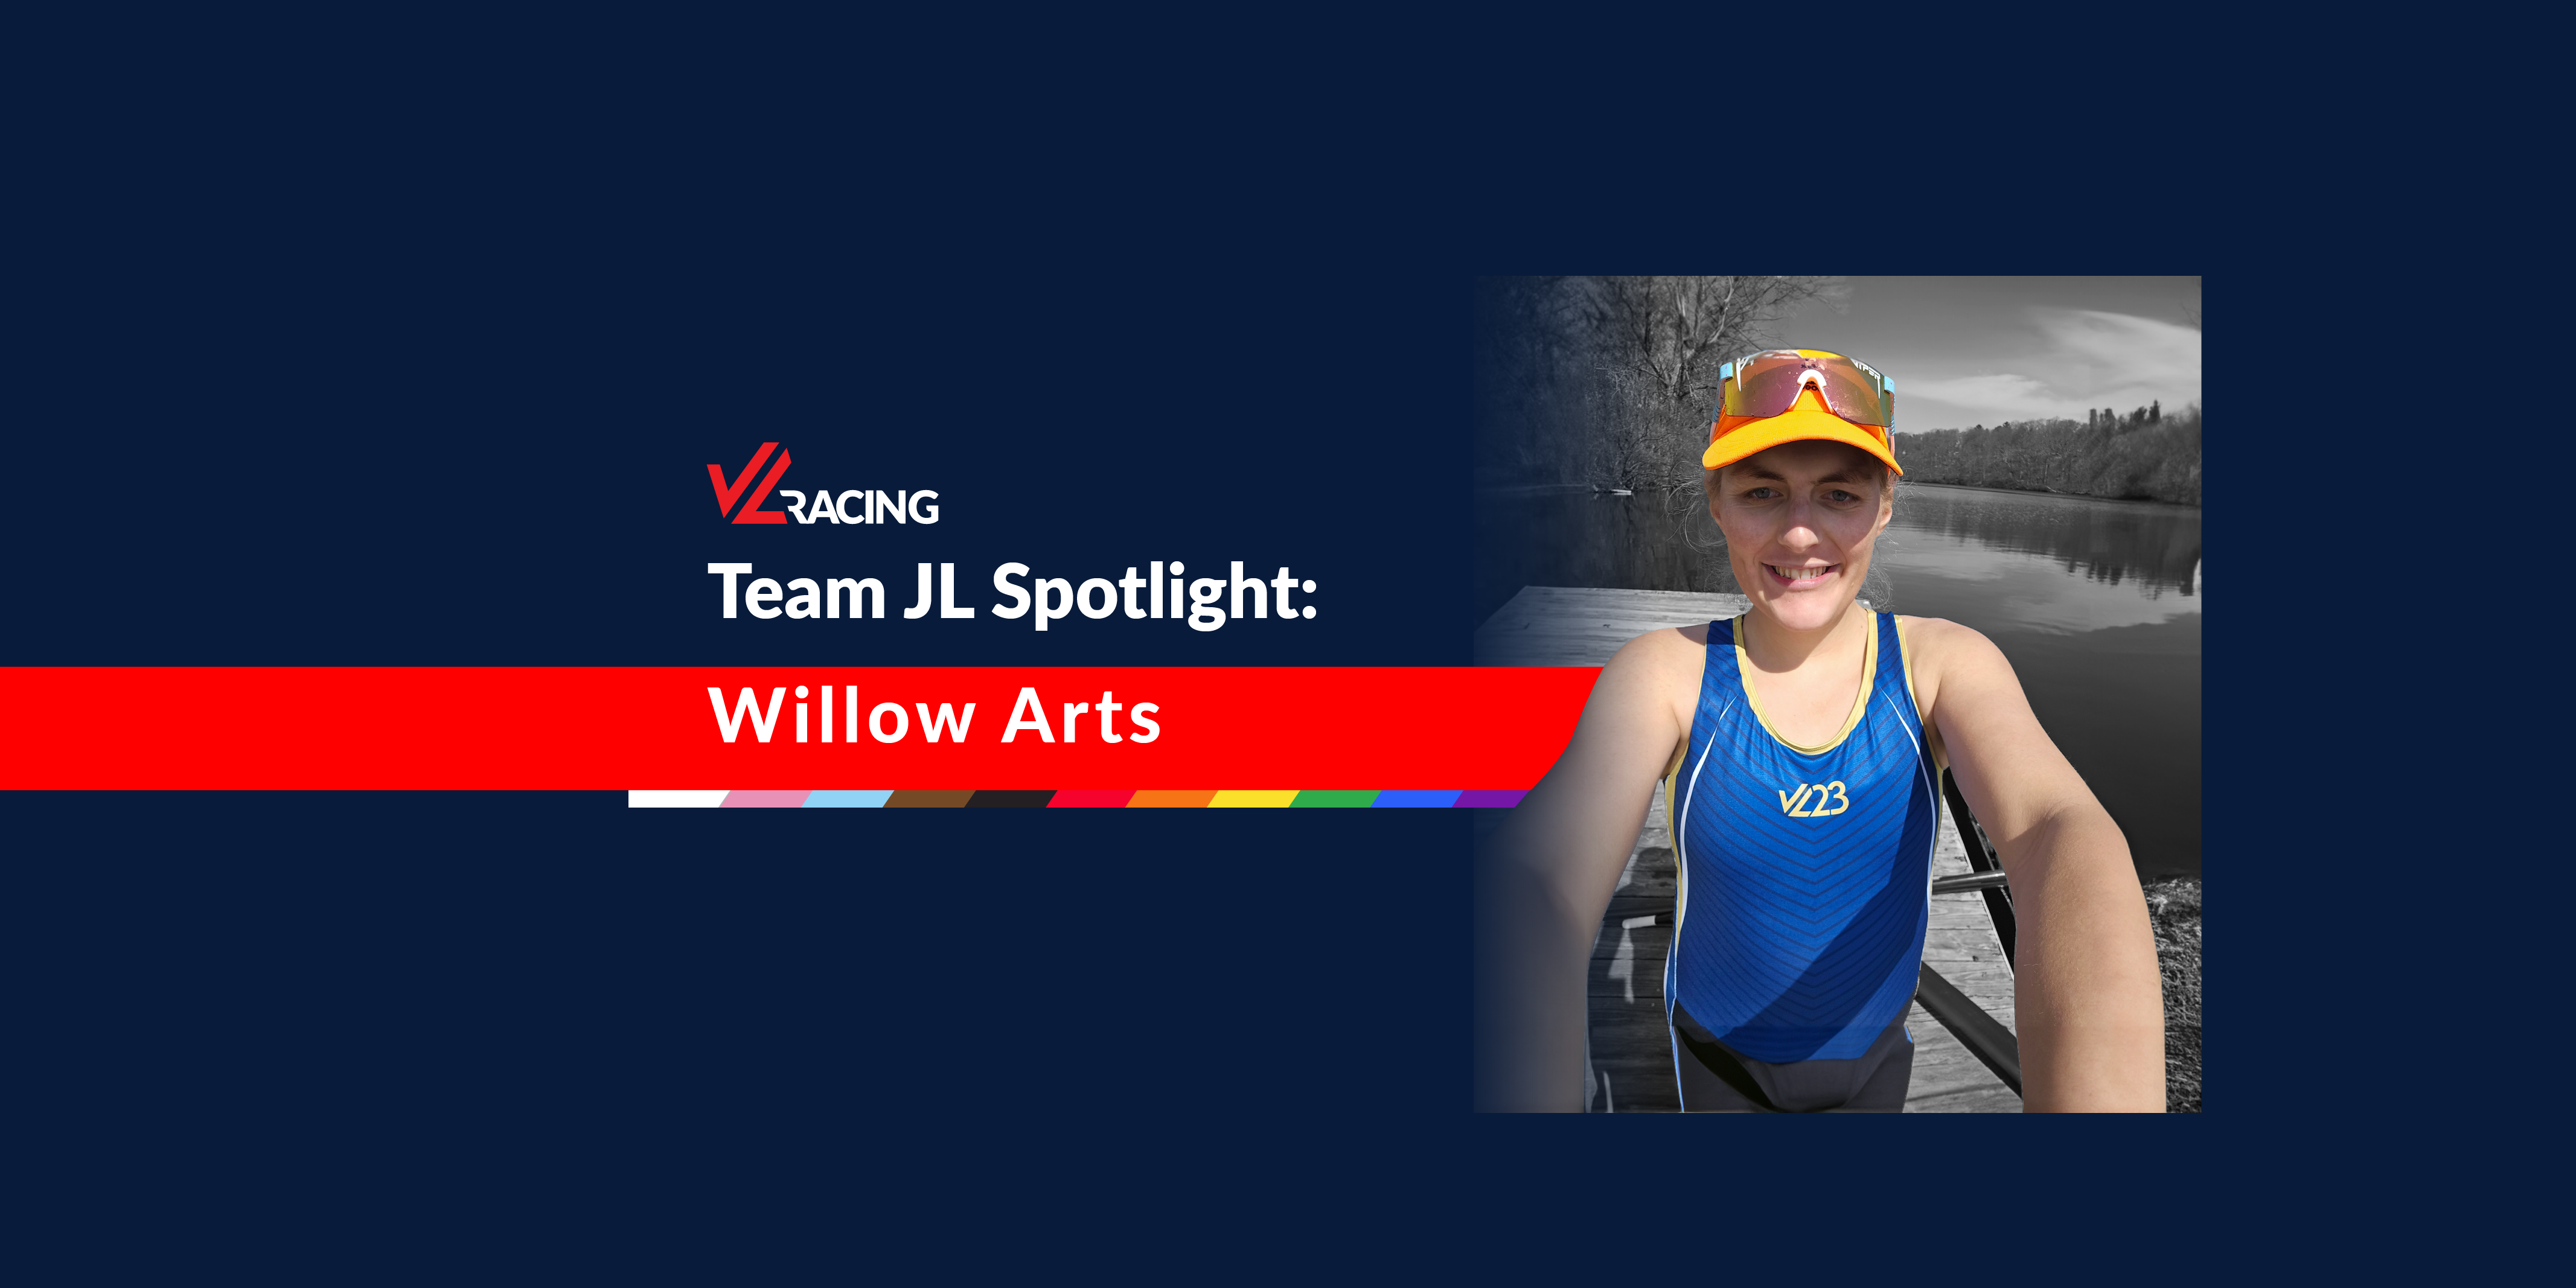 Willow Athleticwear